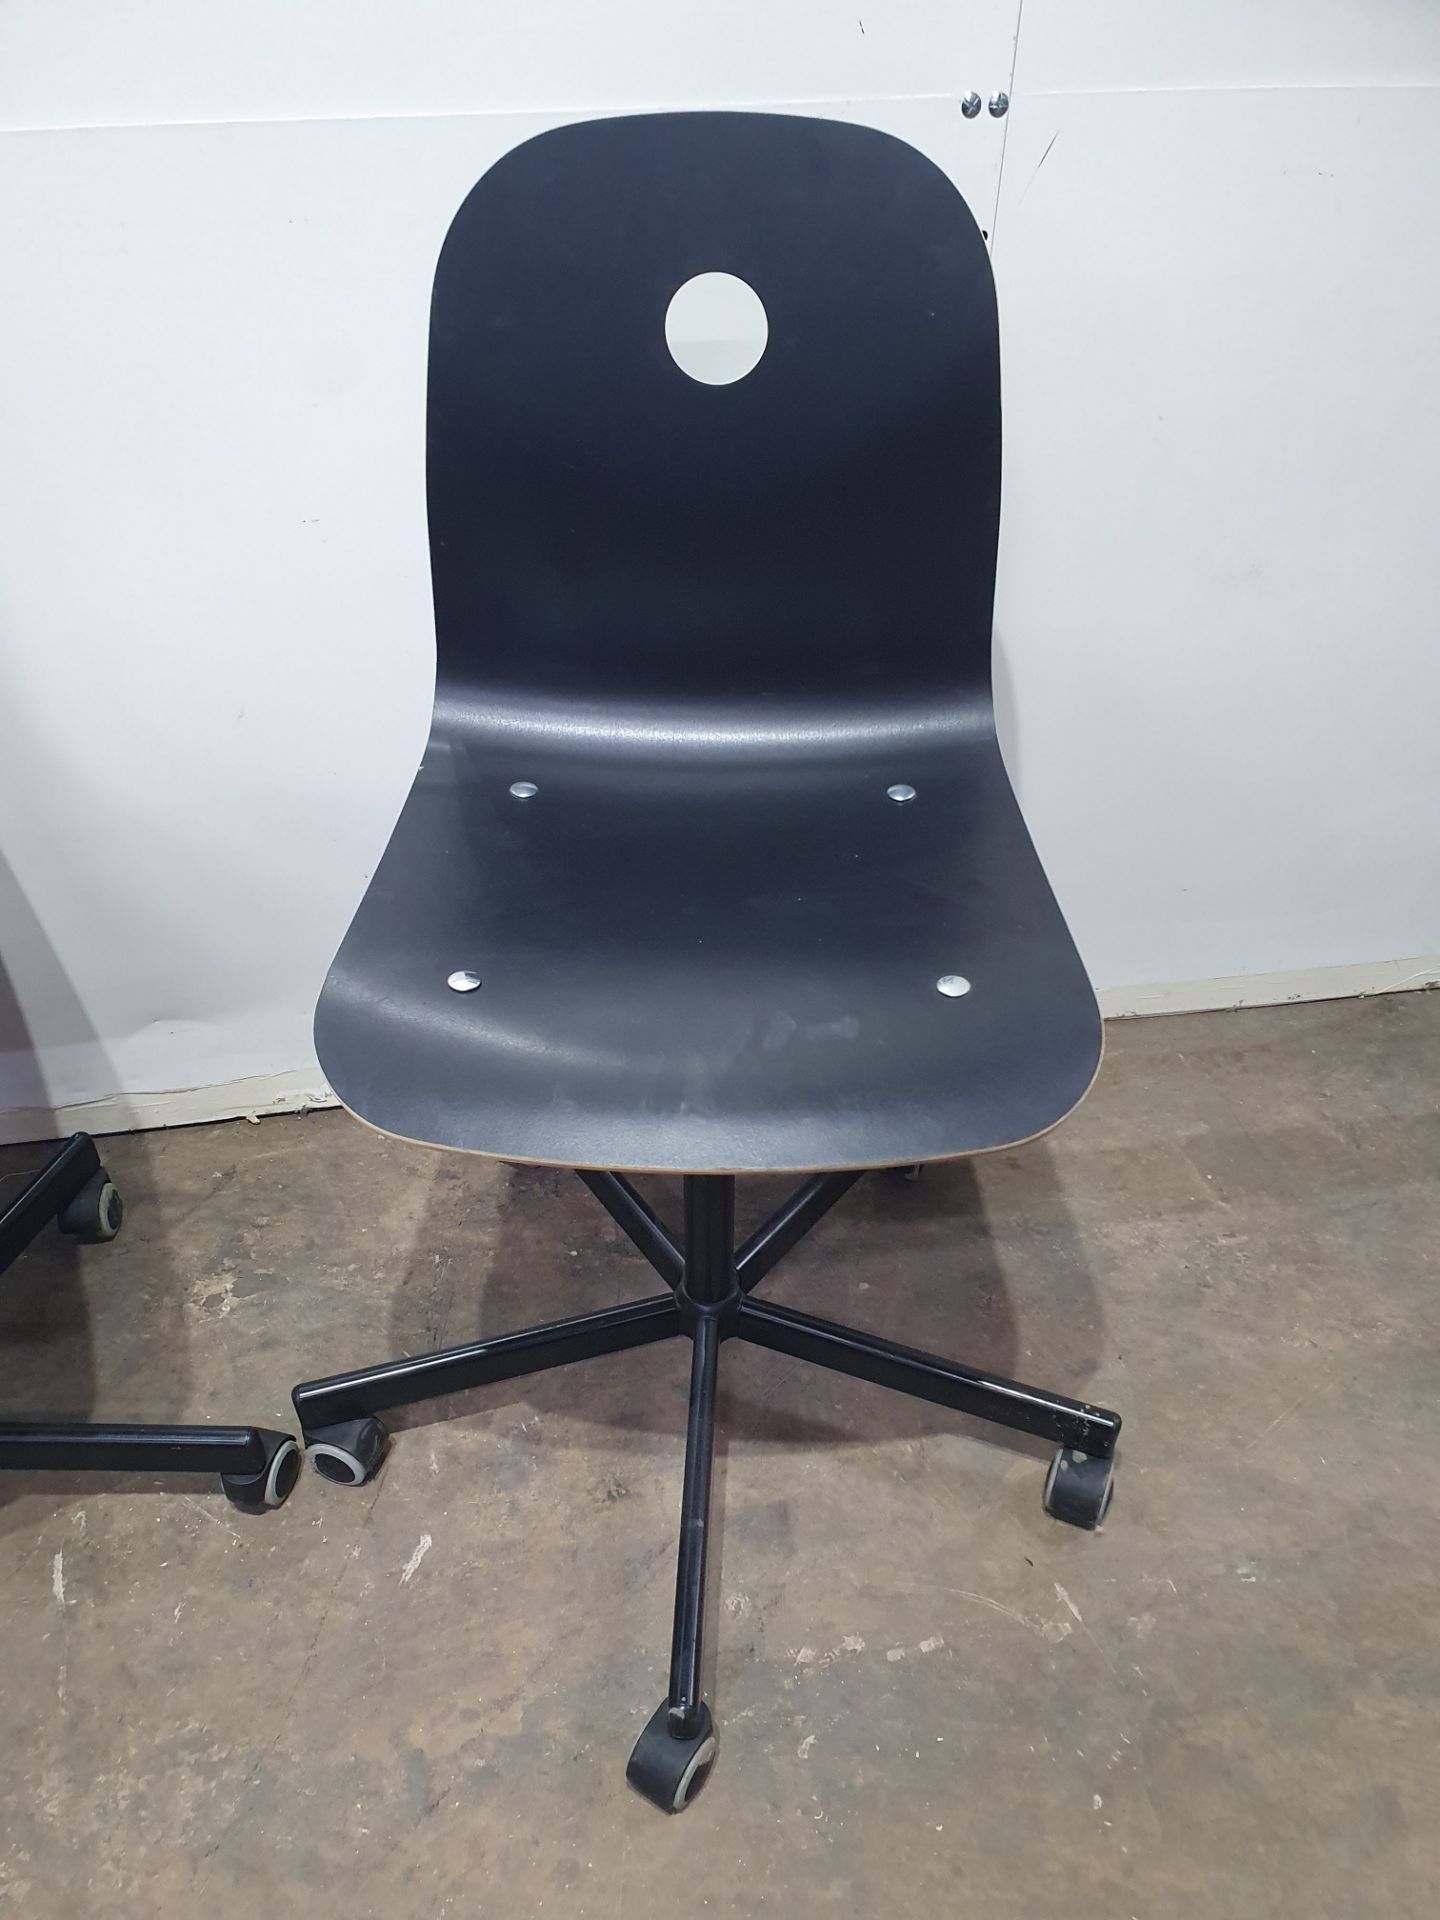 2 x Black Wooden Height Adjustable Chairs on Wheels - Image 3 of 5